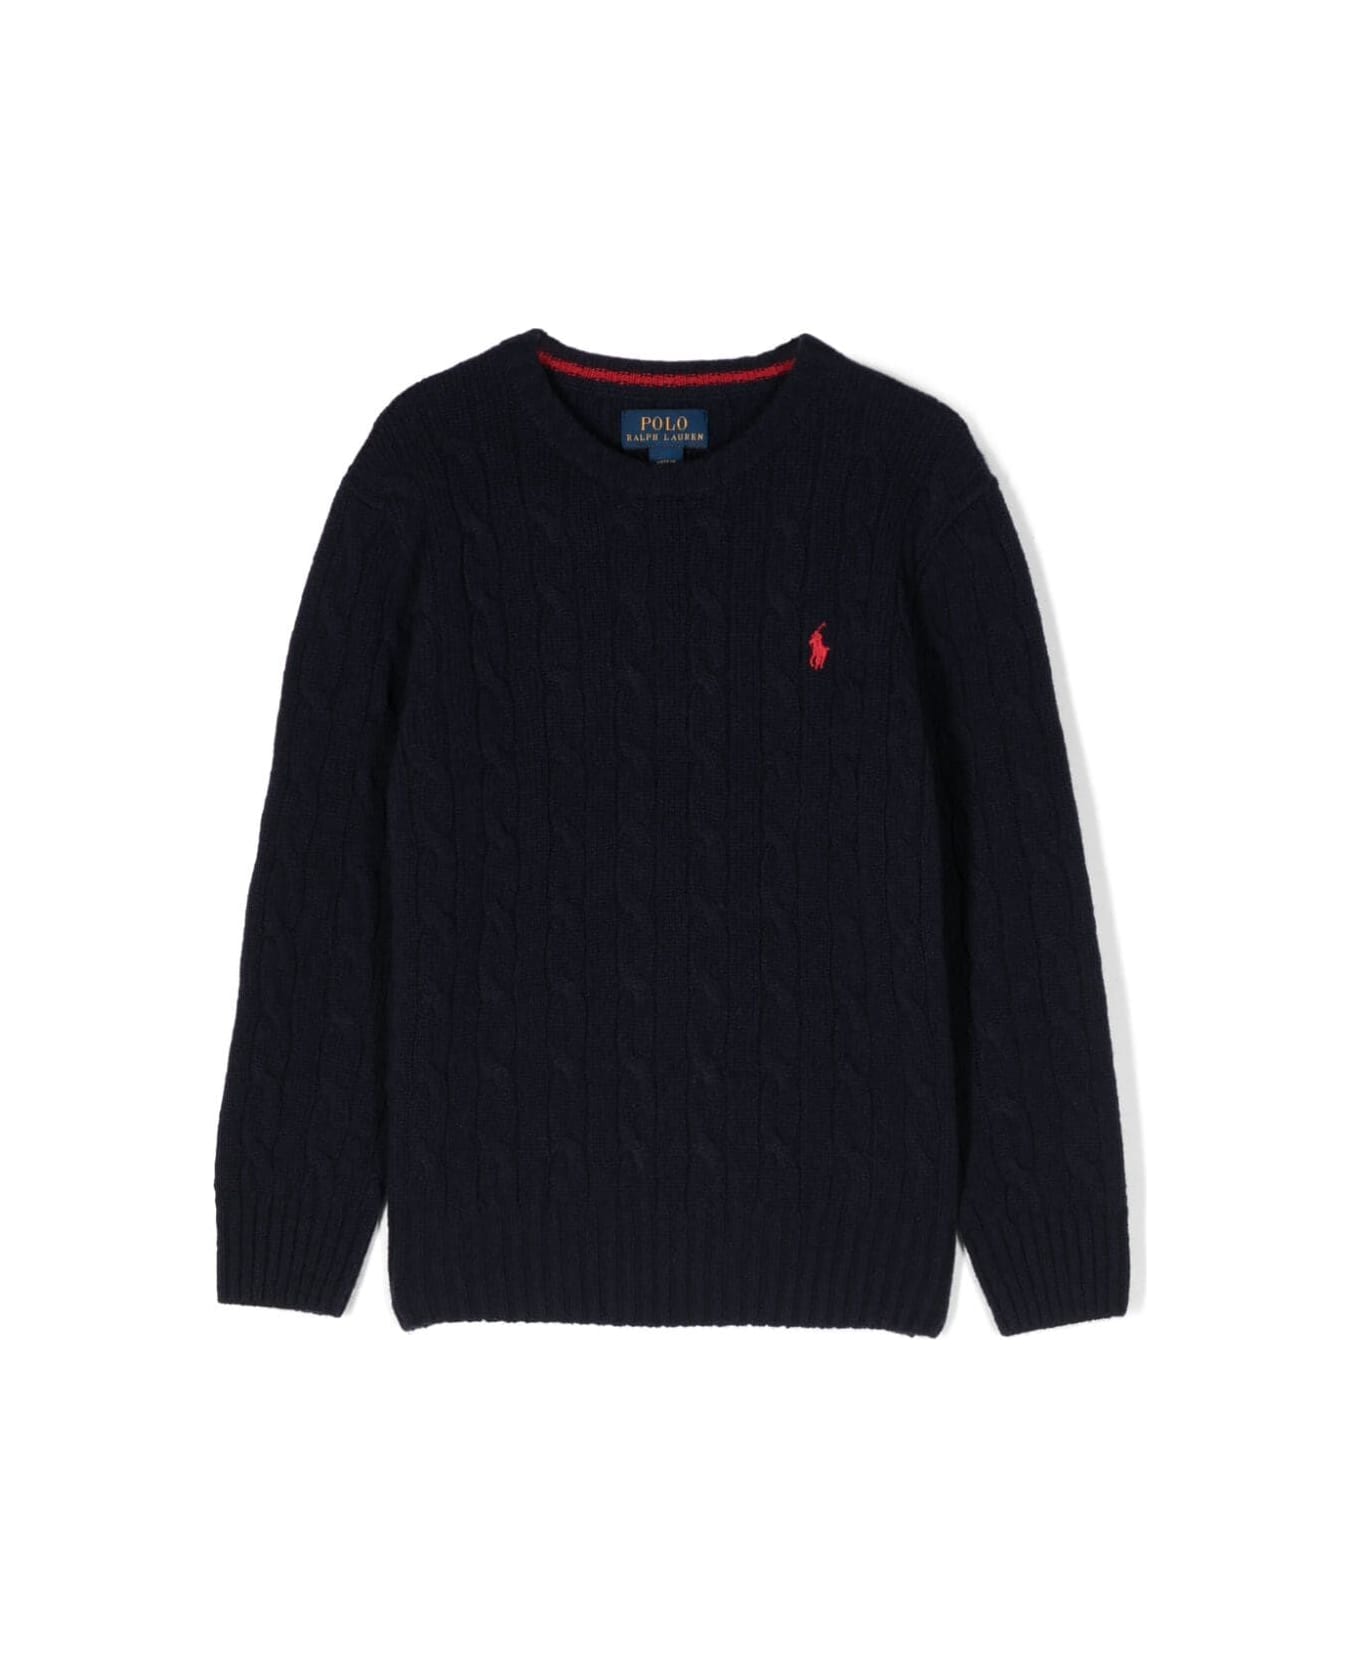 Polo Ralph Lauren Ls Cn Po Sweater Pullover - Red